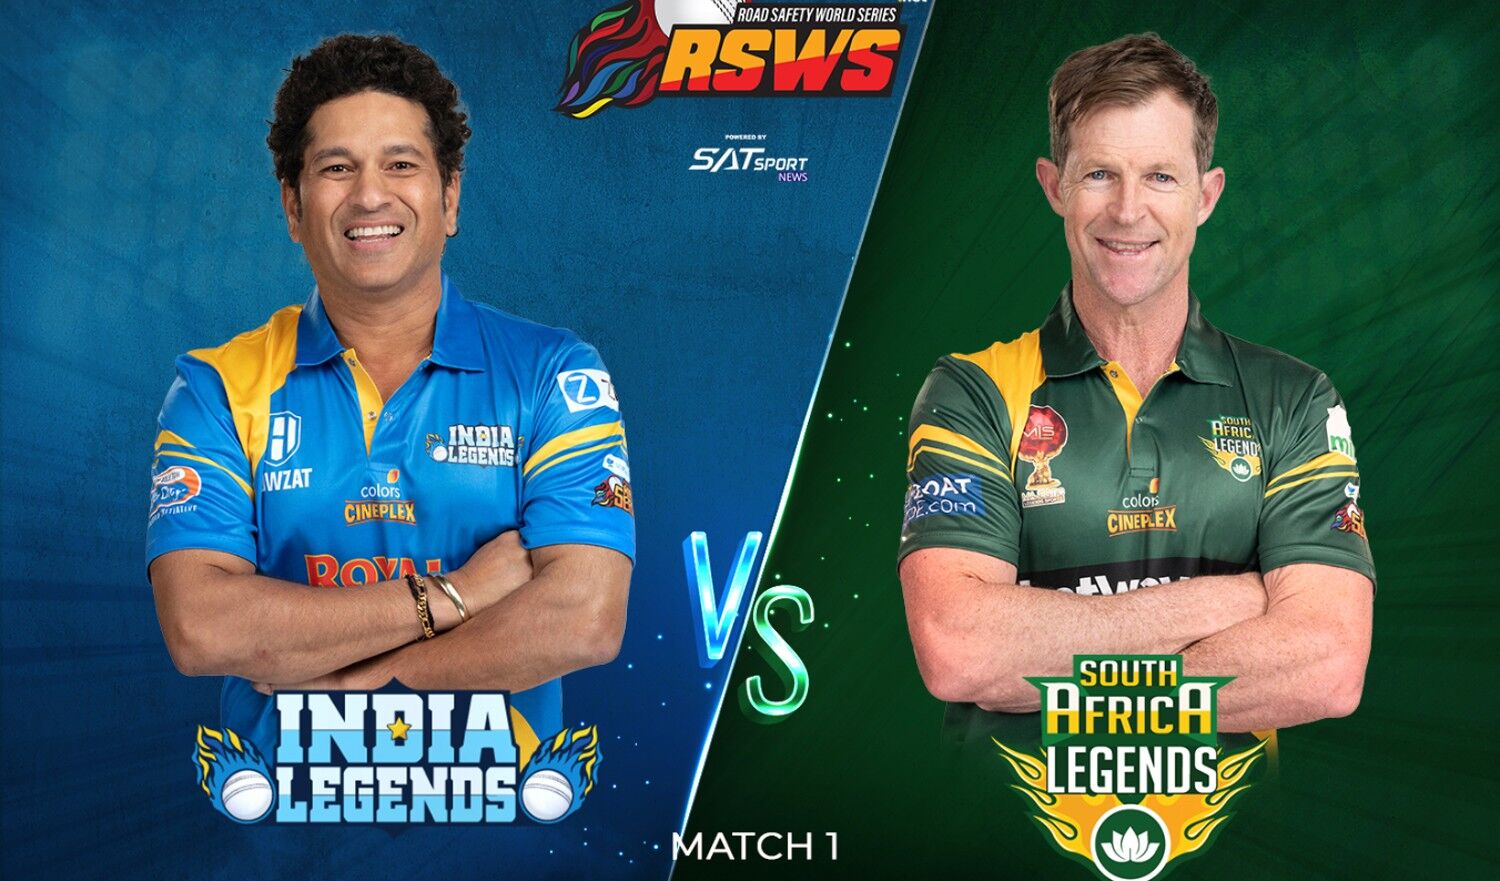 Road Safety World Series: From today there will be fours and sixes in Green Park, Jonty Rhodes will be in front of Sachin